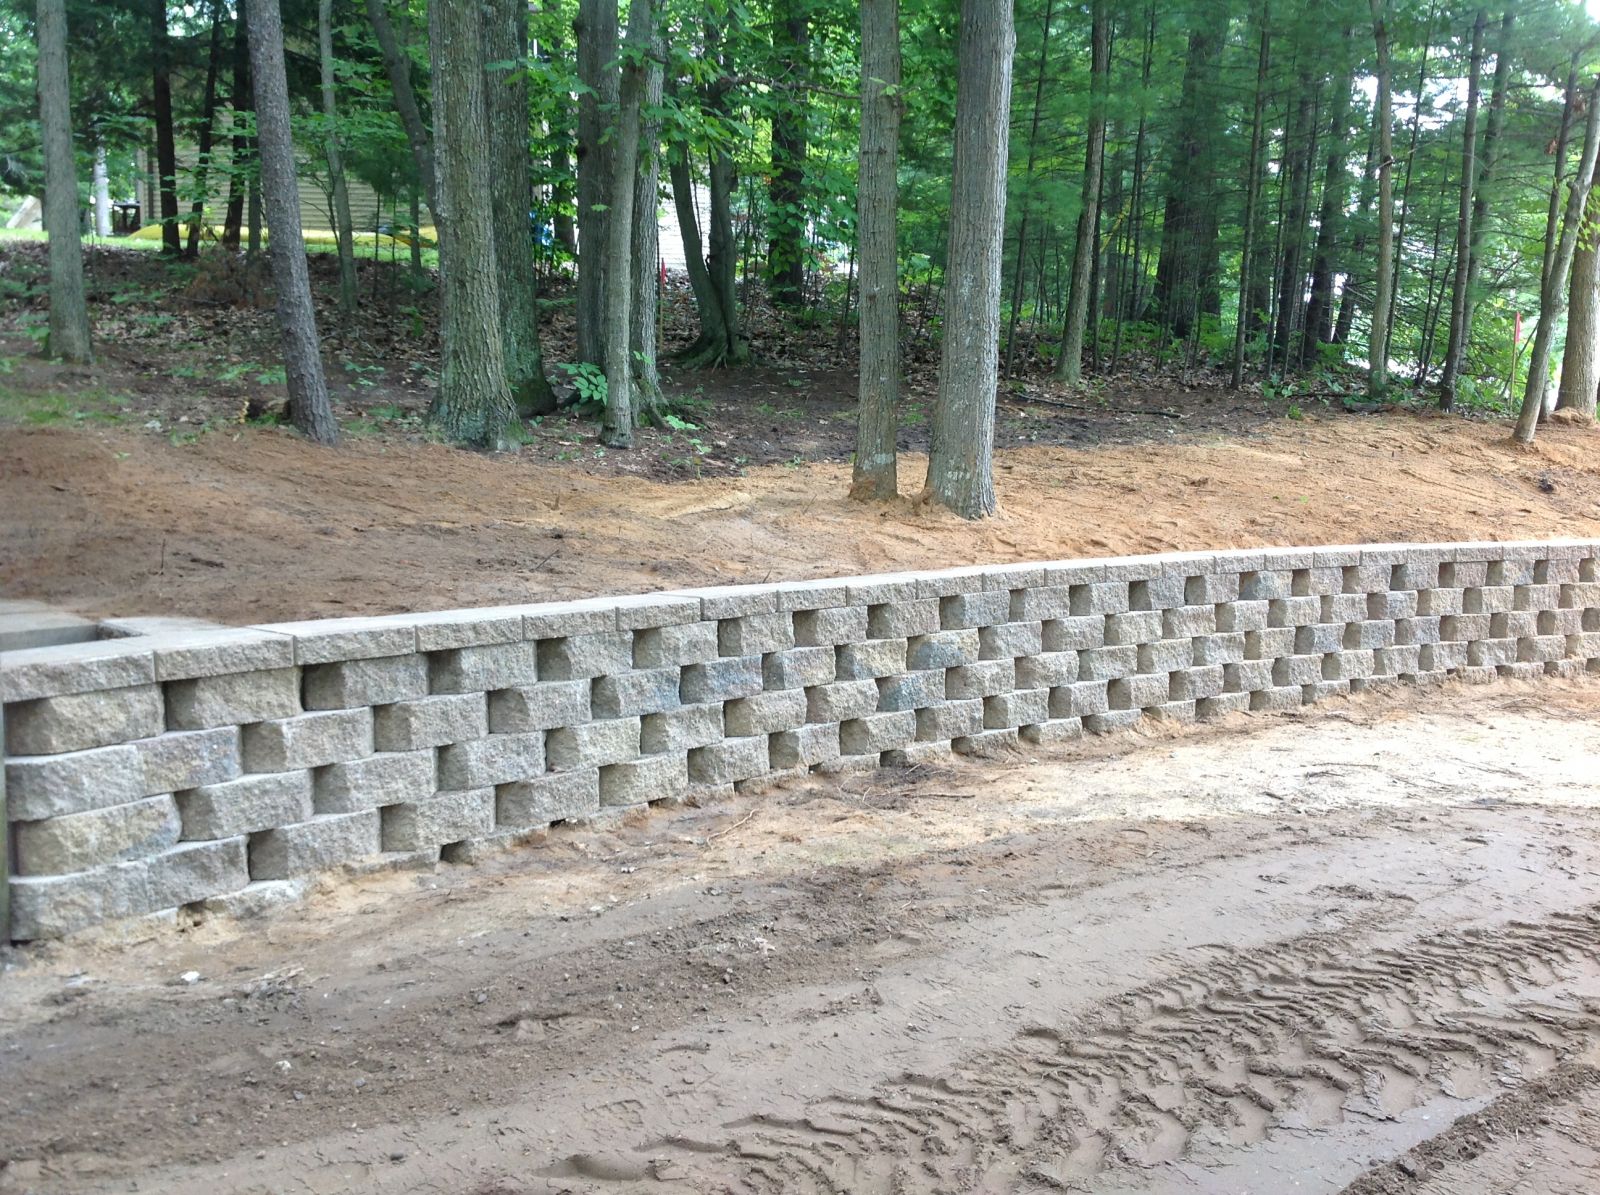 Retaining Wall in woods